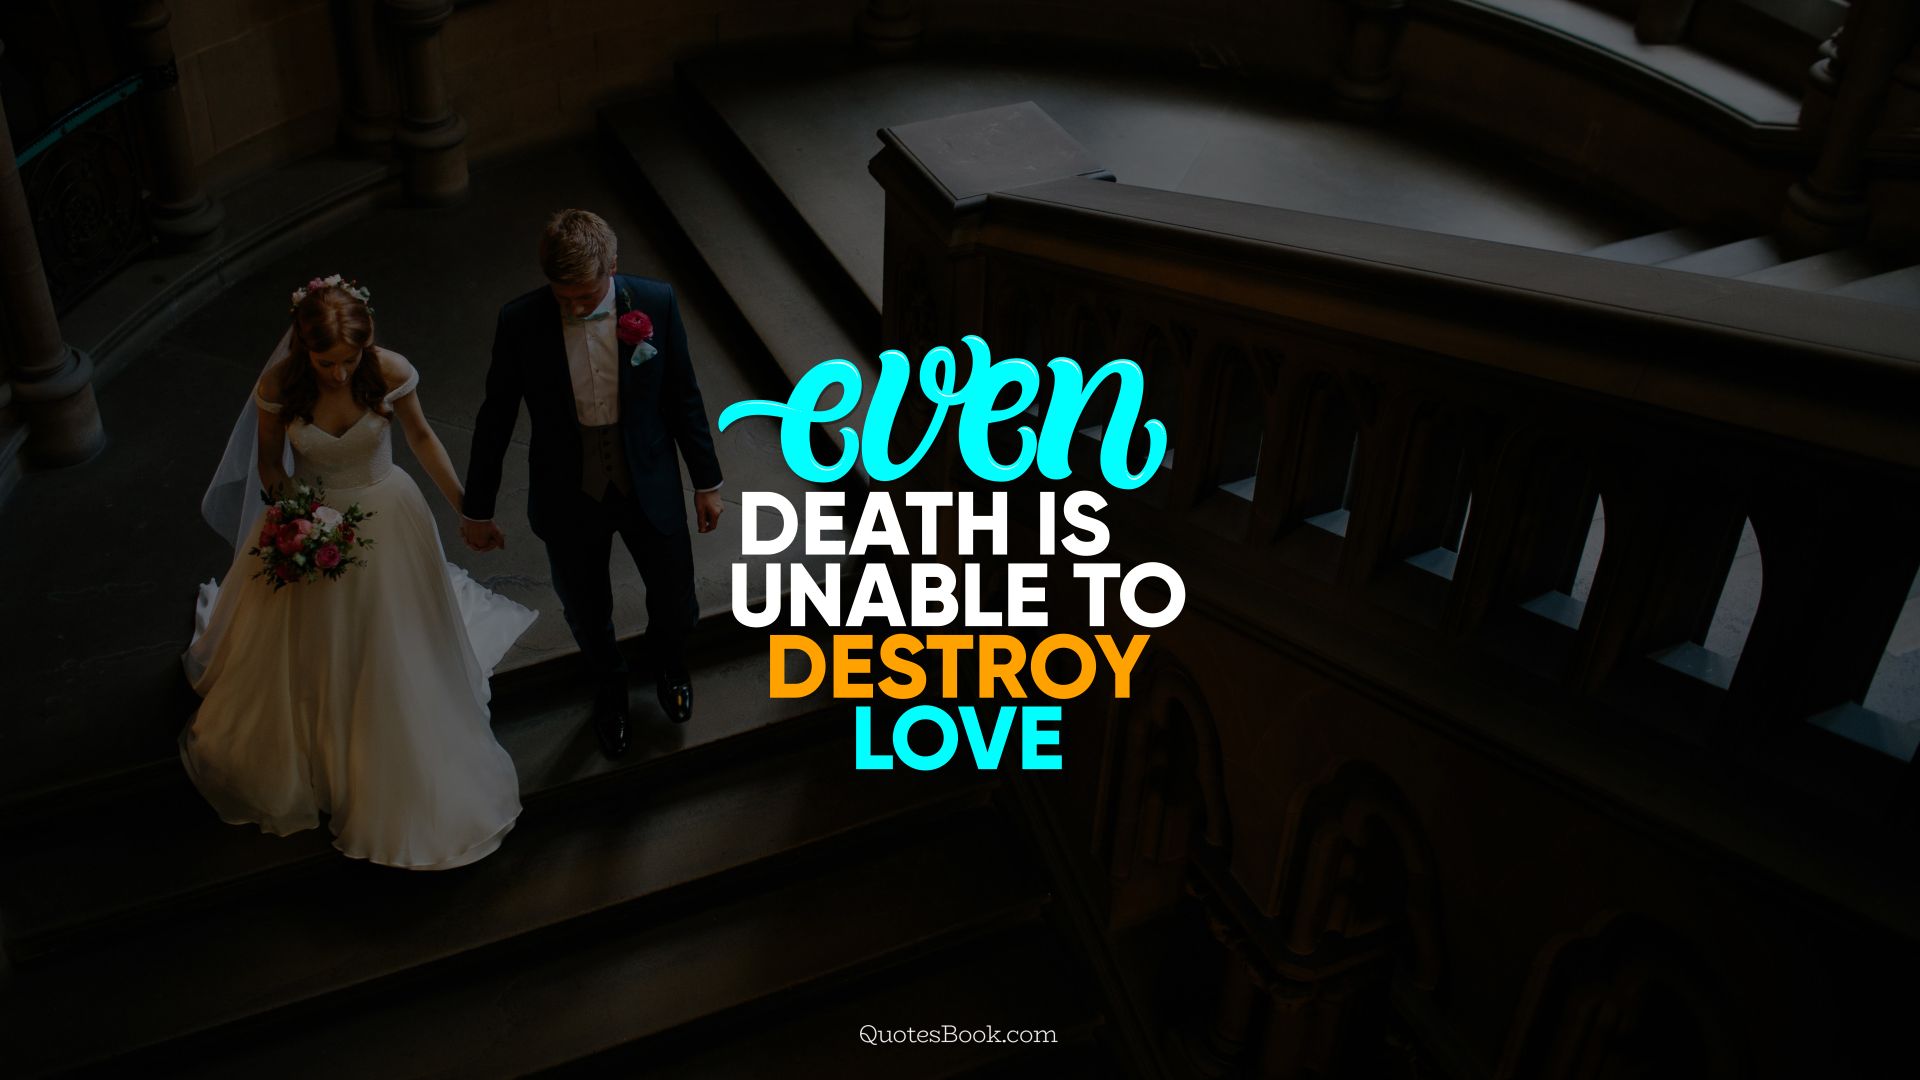 Even death is unable to destroy love. - Quote by QuotesBook